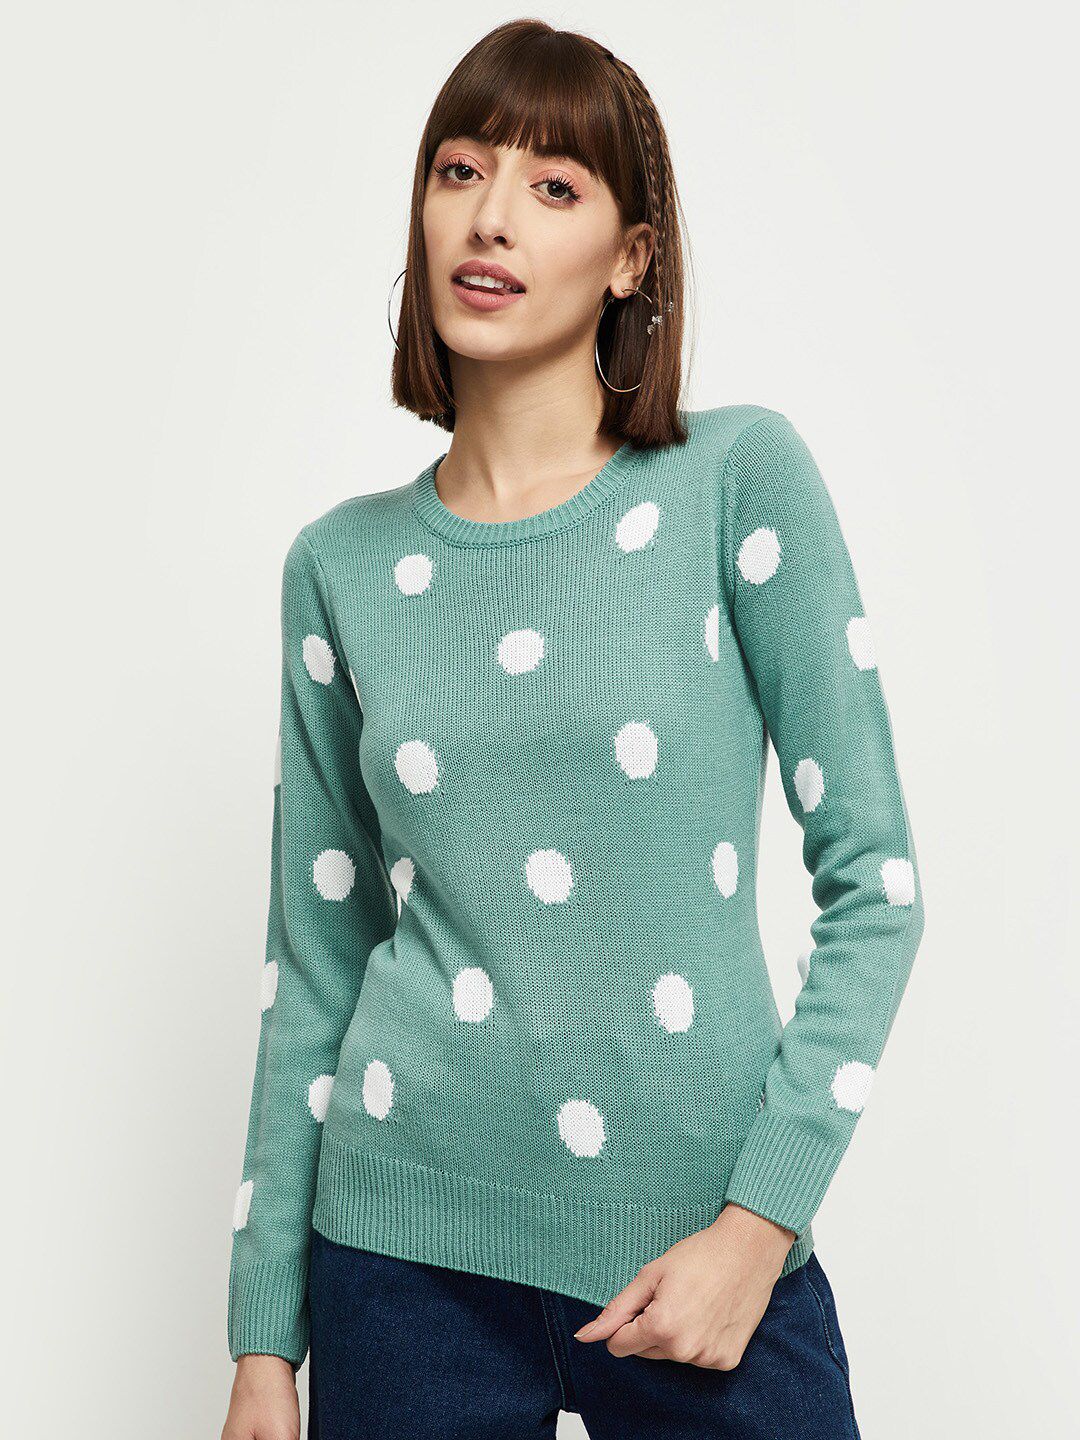 max Women Green & White Polka Dots Designed Pullover Sweater Price in India